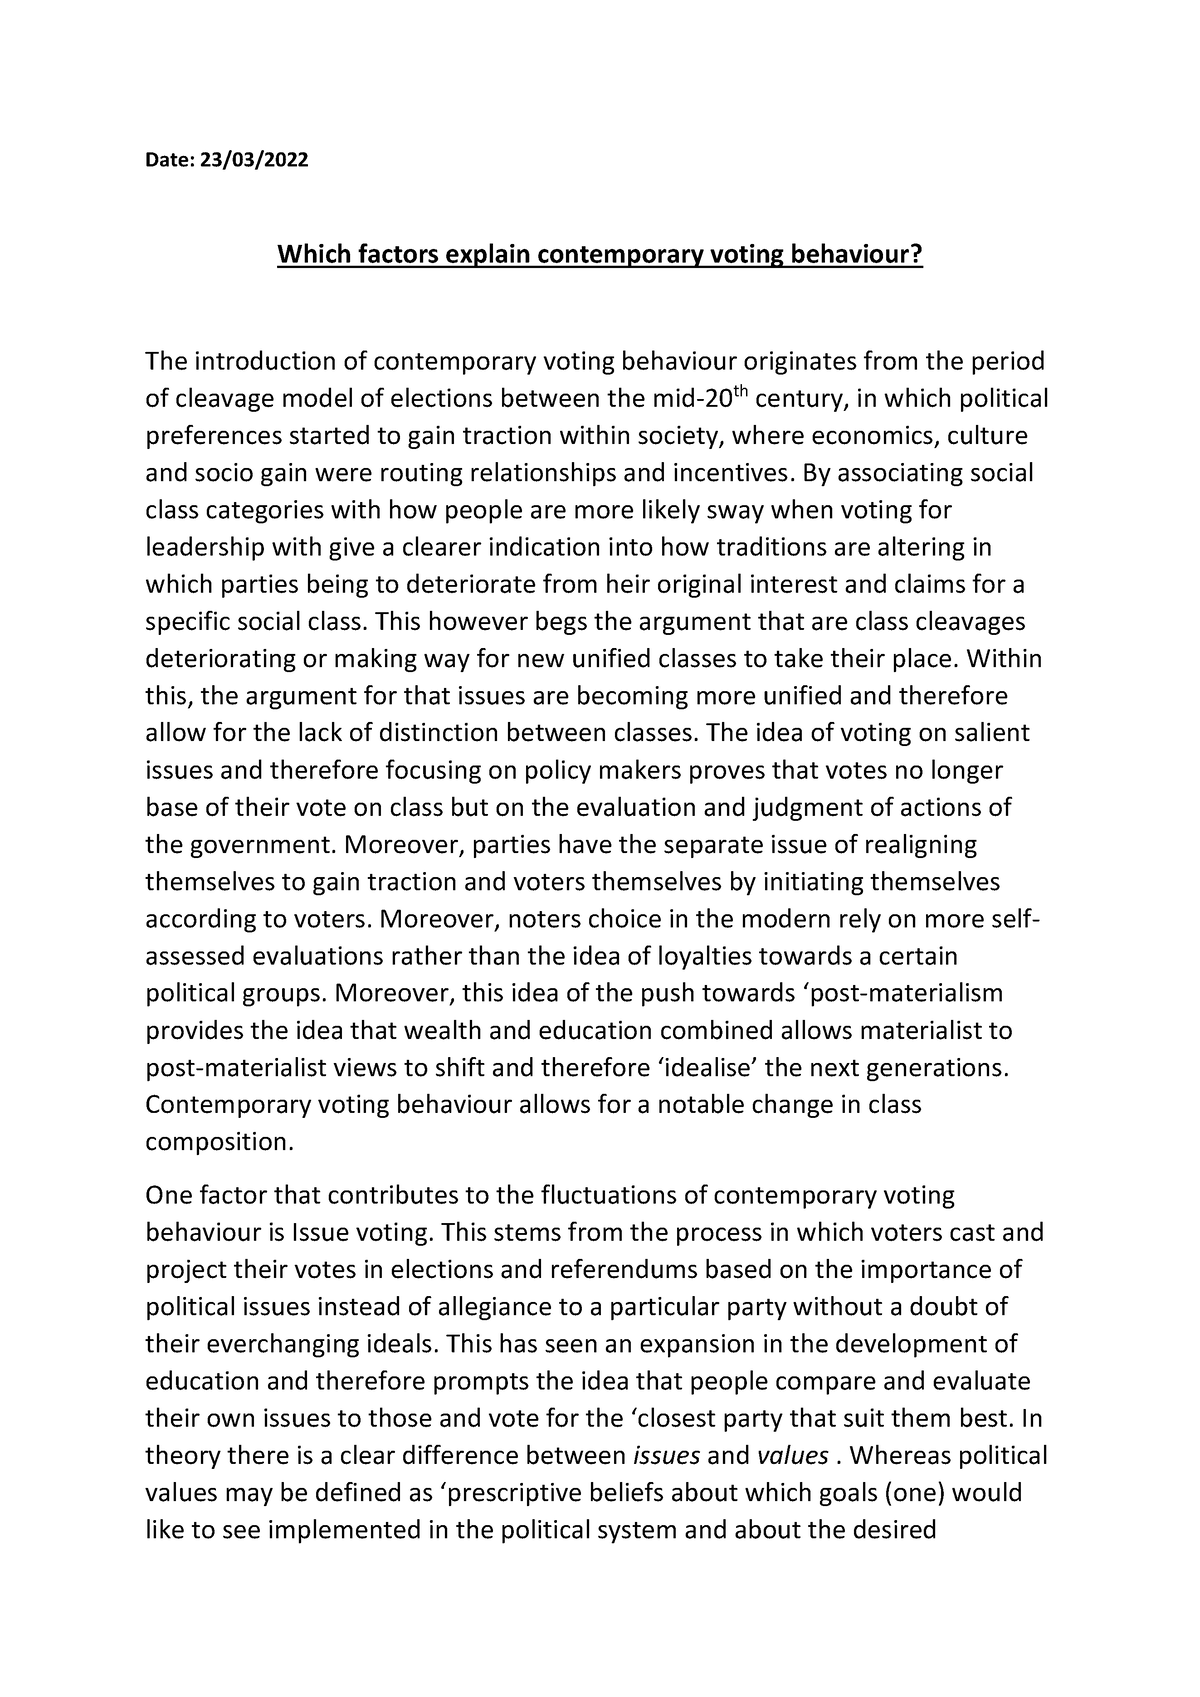 essay on how political parties are formed